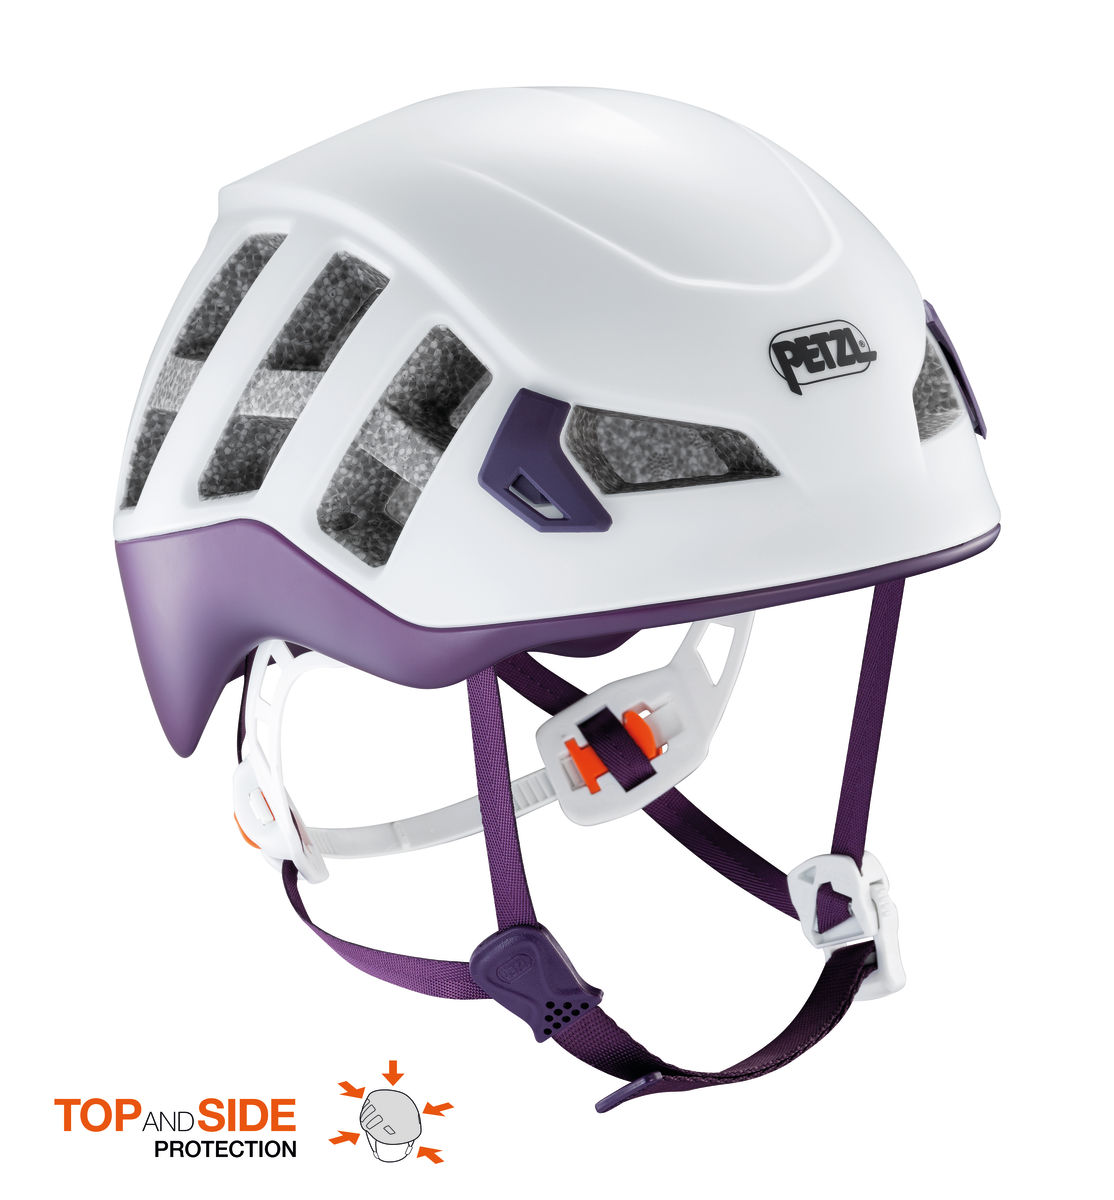 Lightweight helmet with enhanced protection for climbing PETZL METEOR 2019 NEW 